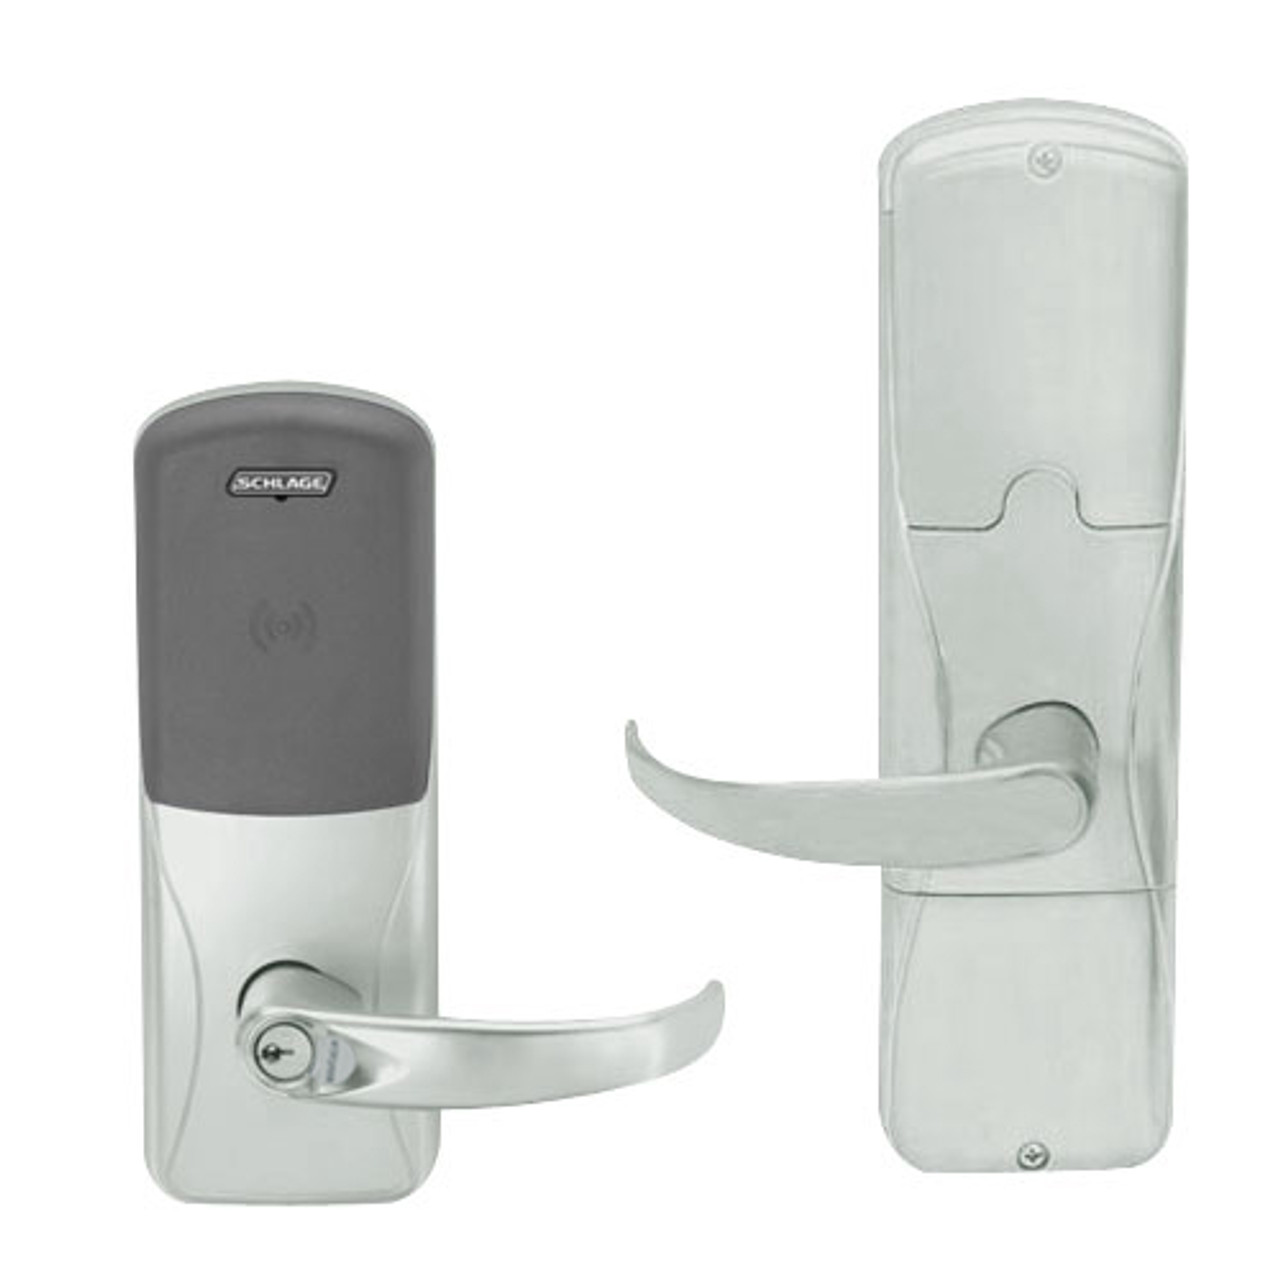 AD200-CY-50-MT-SPA-RD-619 Schlage Office Multi-Technology Lock with Sparta Lever in Satin Nickel